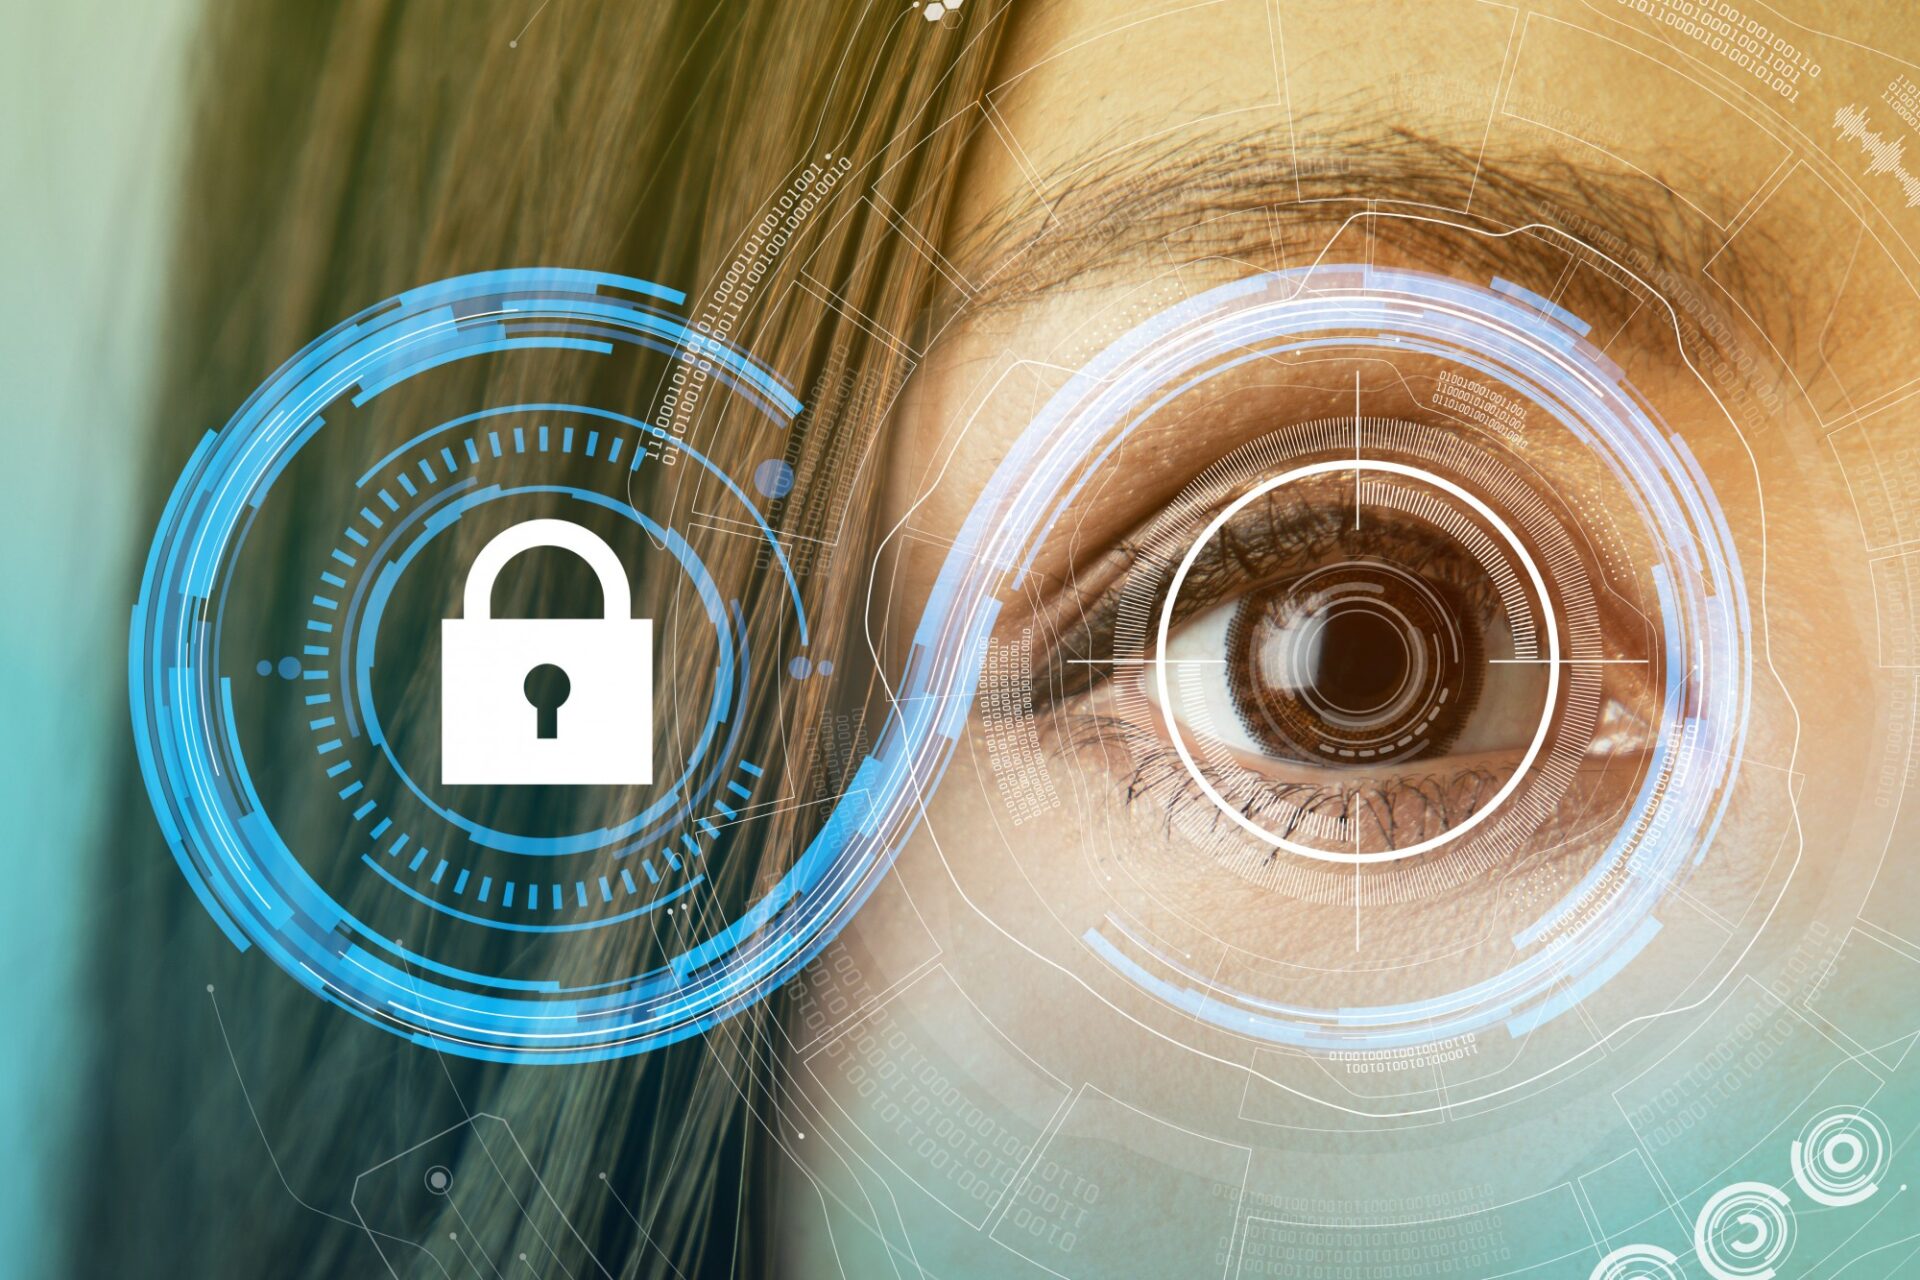 Iris Recognition Solution Market Analysis, Key Players, Share Dynamic Demand and Consumption by 2024 to 2033